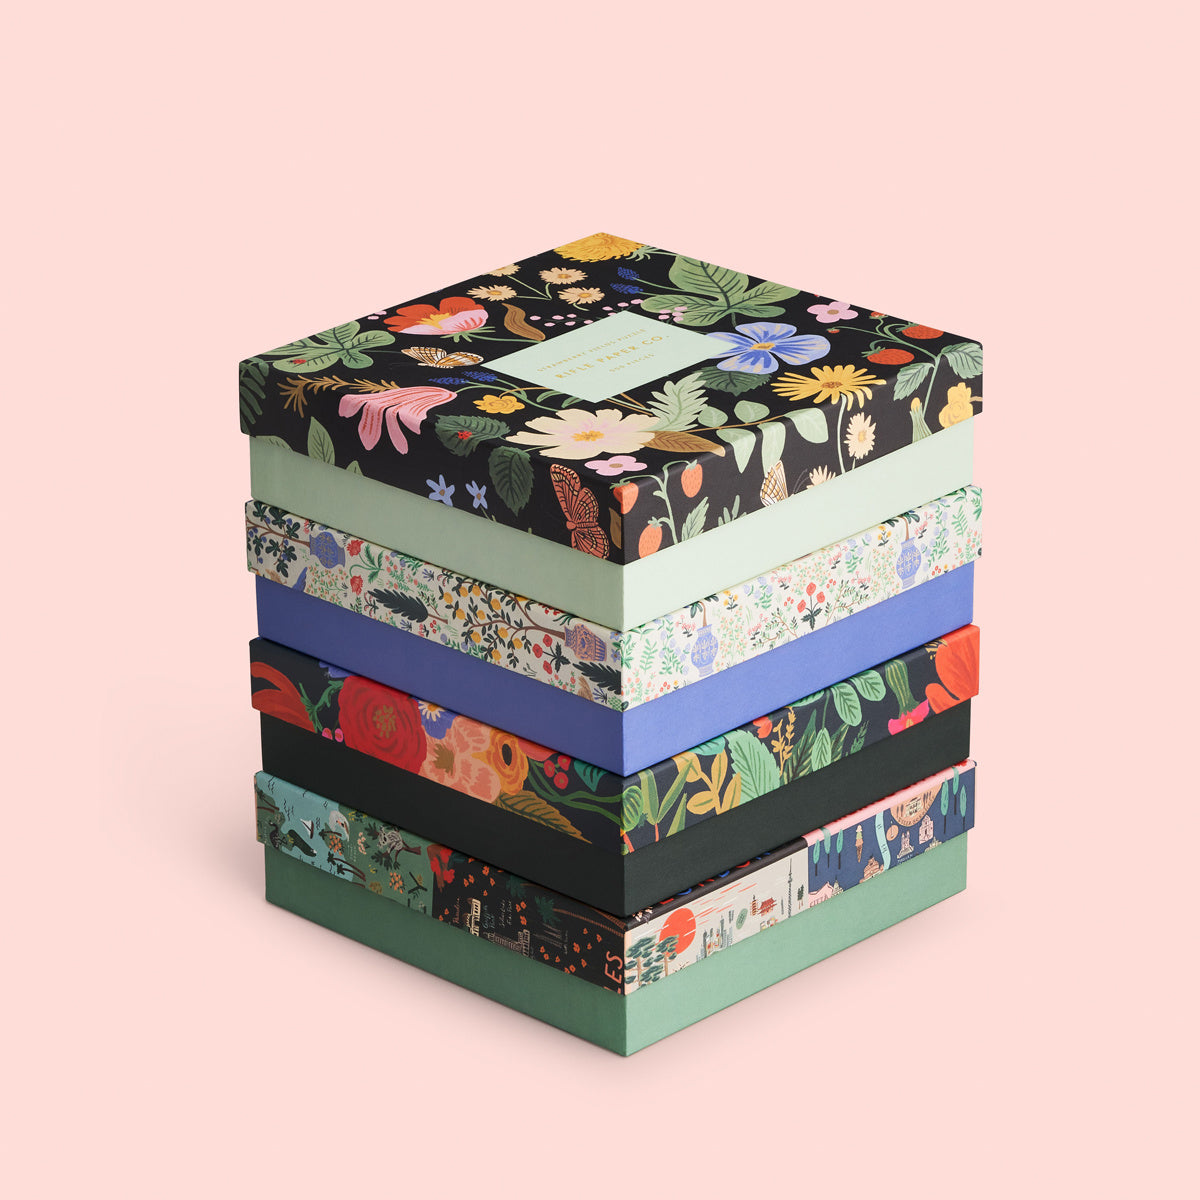 Rifle Paper Co Jigsaw Puzzle